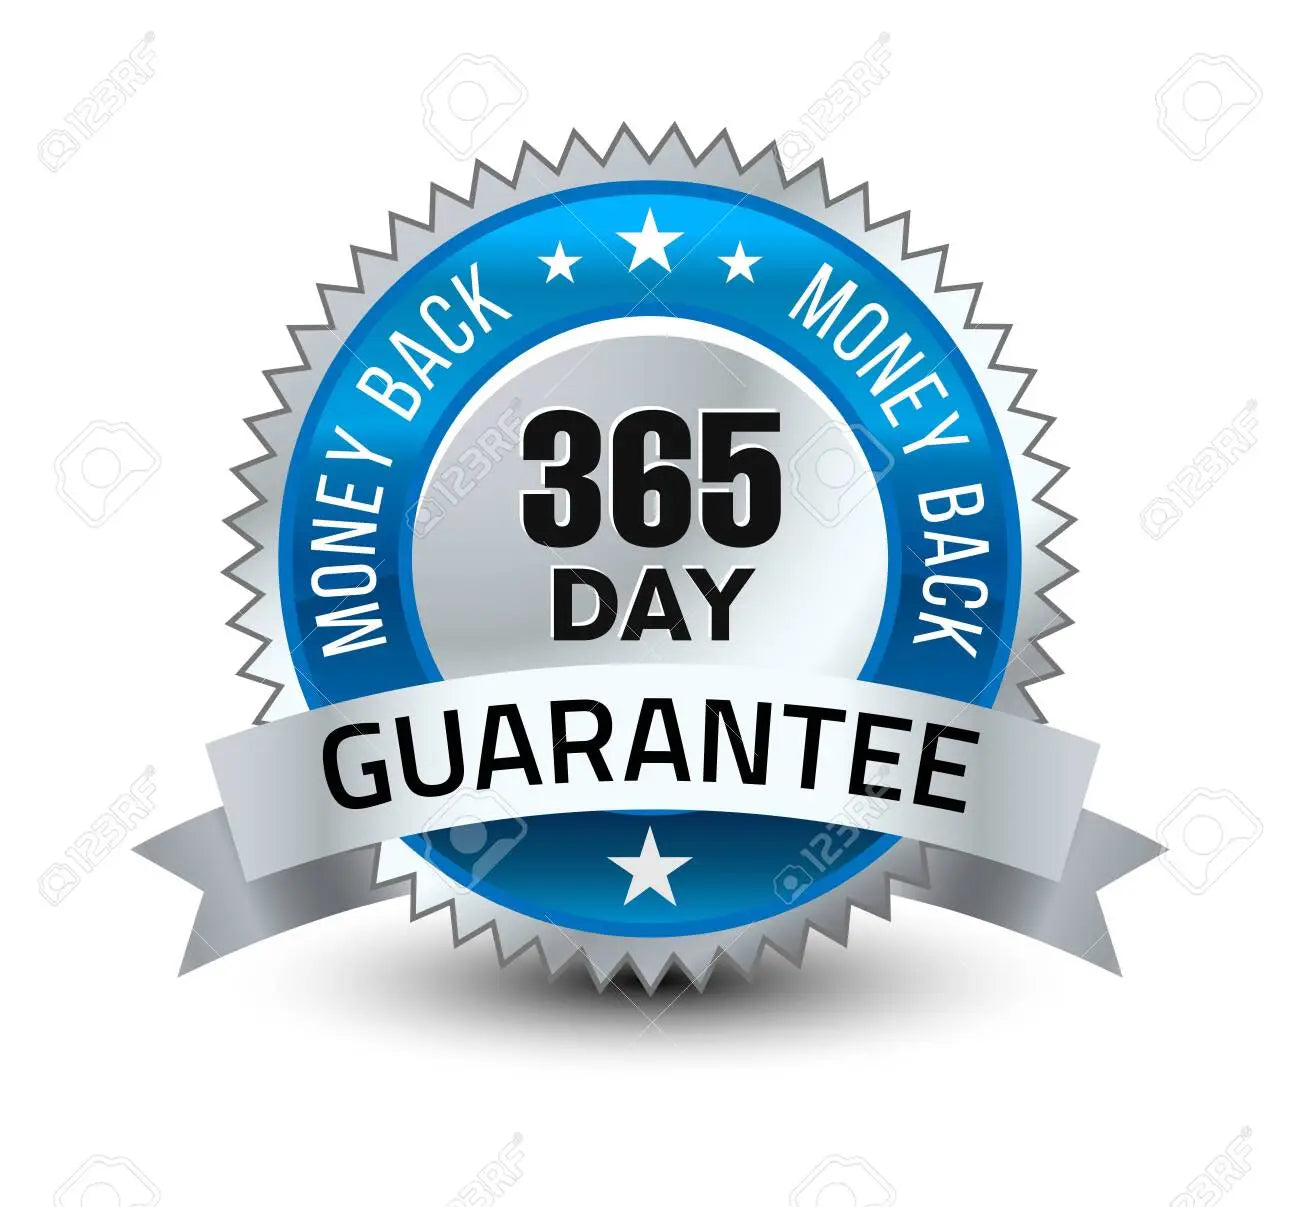 Extended 365 Day Guarantee